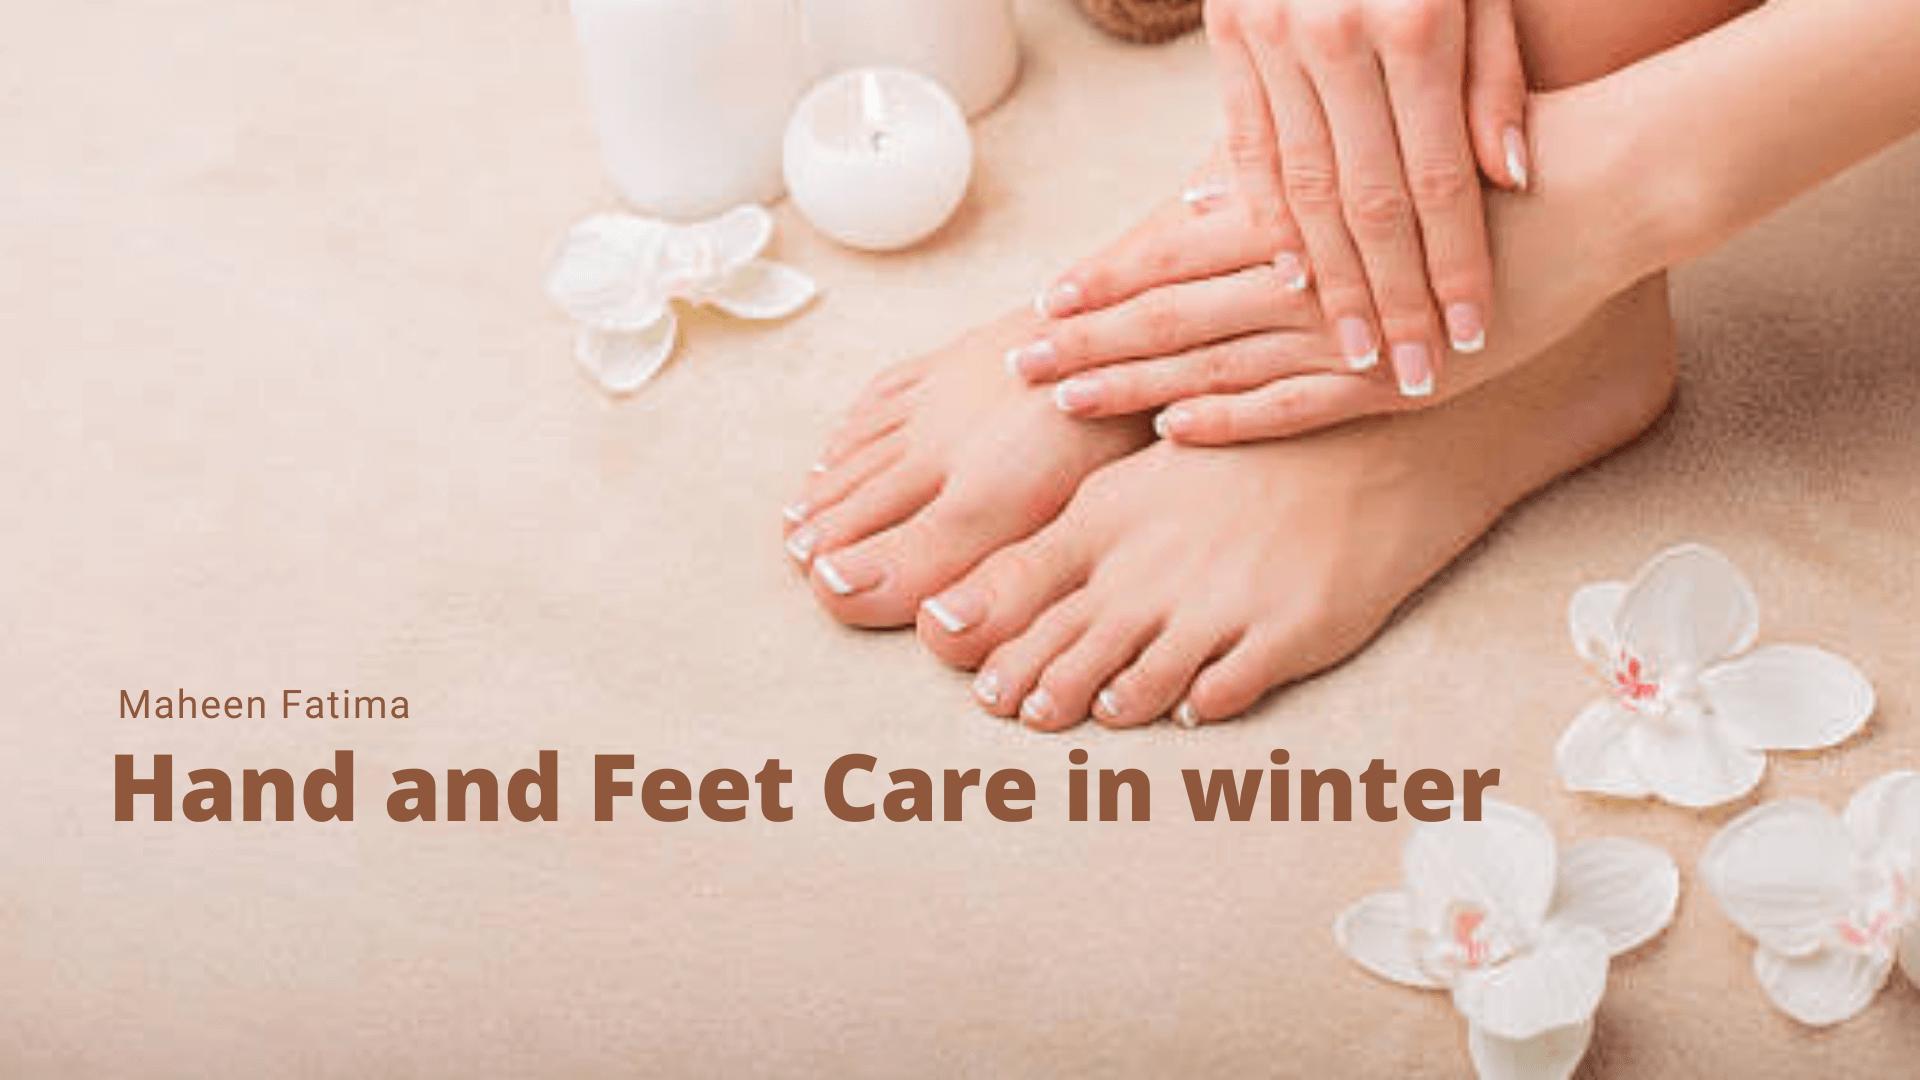 Hand and Feet Care in Winter